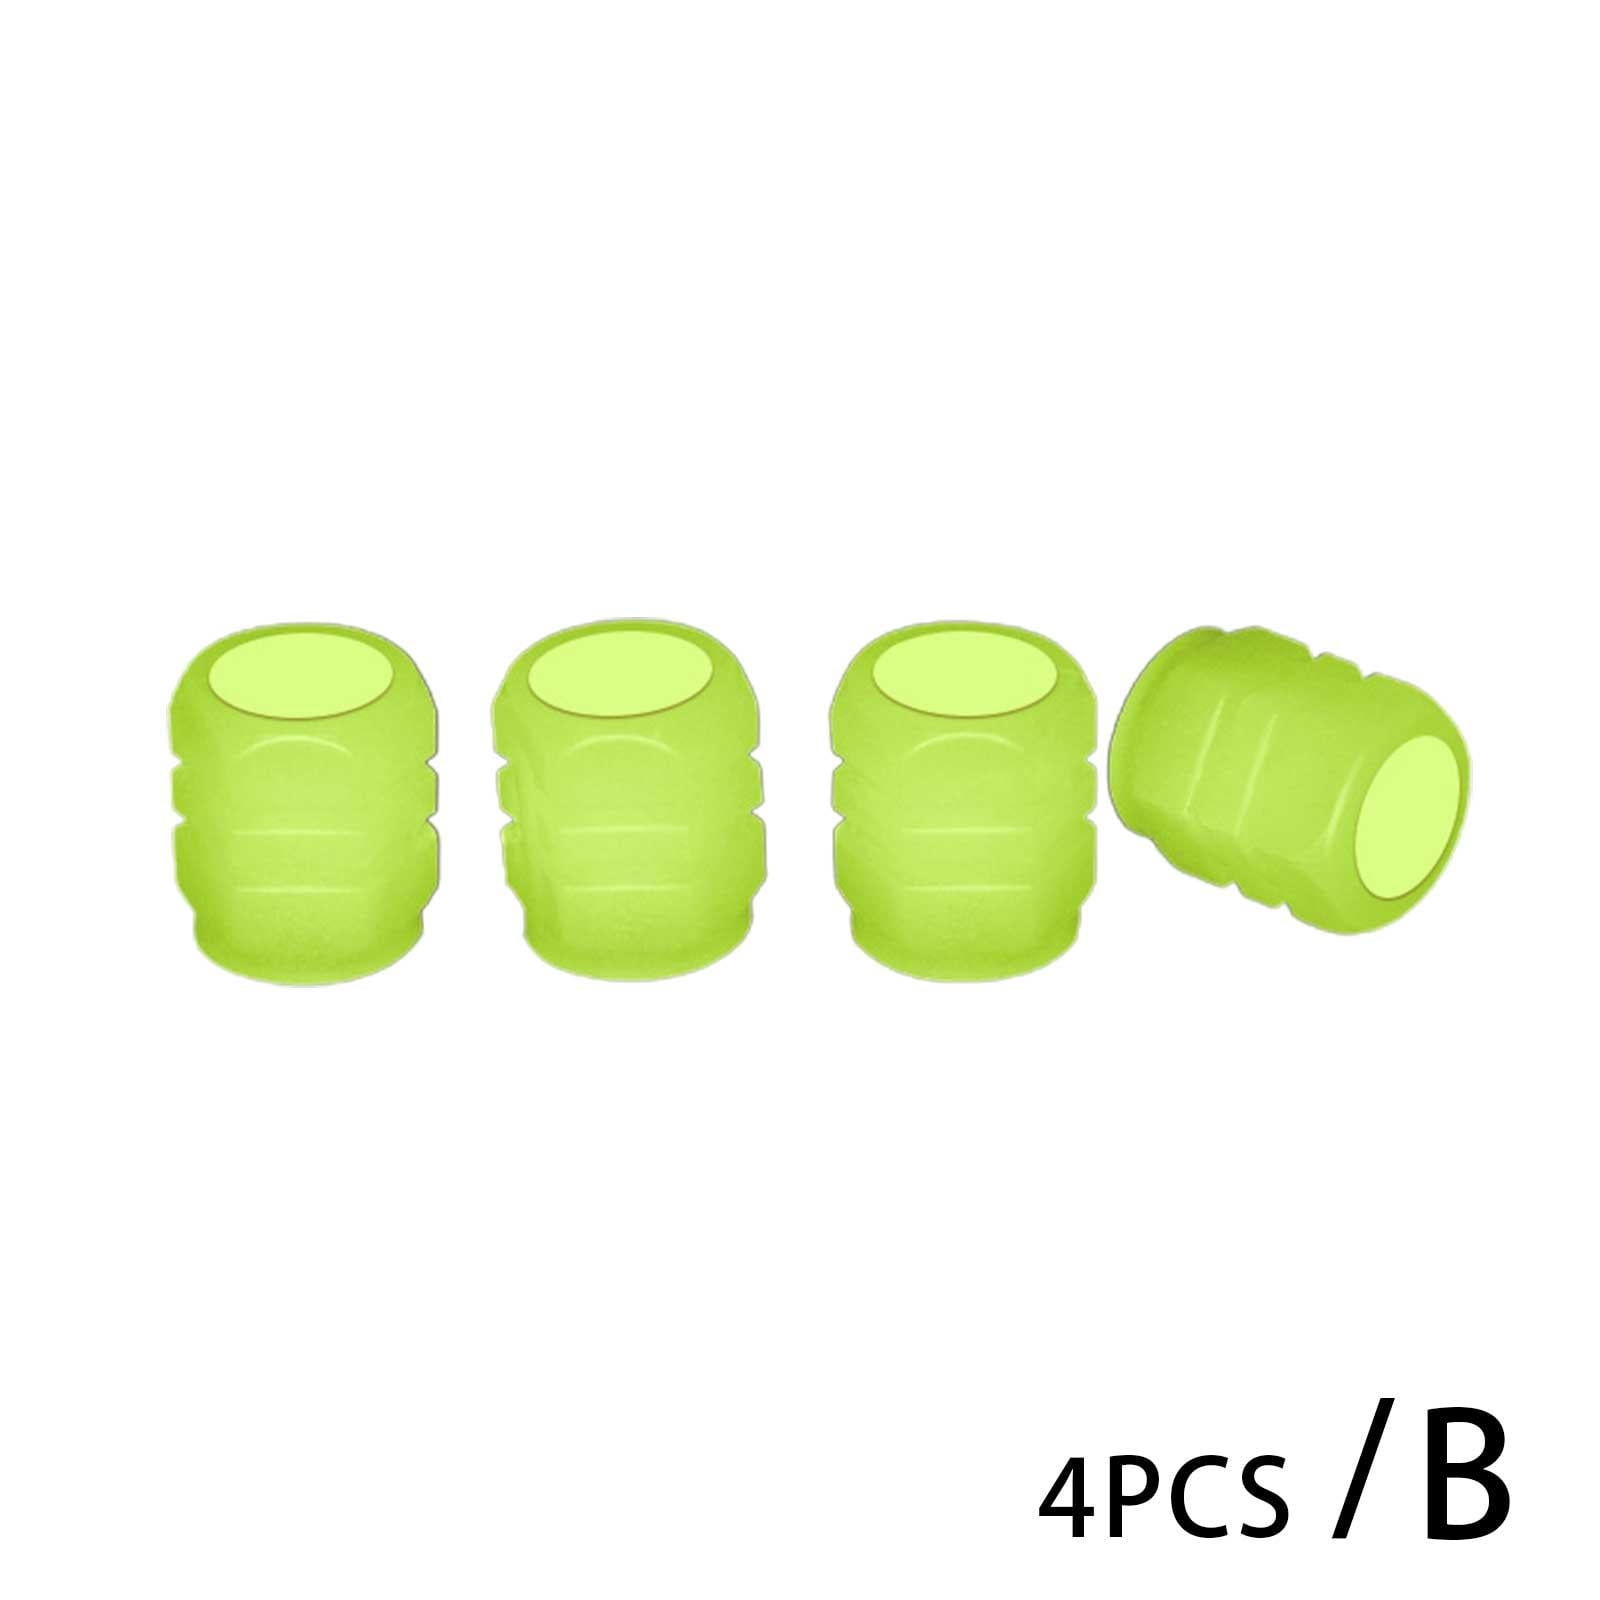 4pc High-quality Metal Tire Valve Stem Caps Covers for Audi Cars